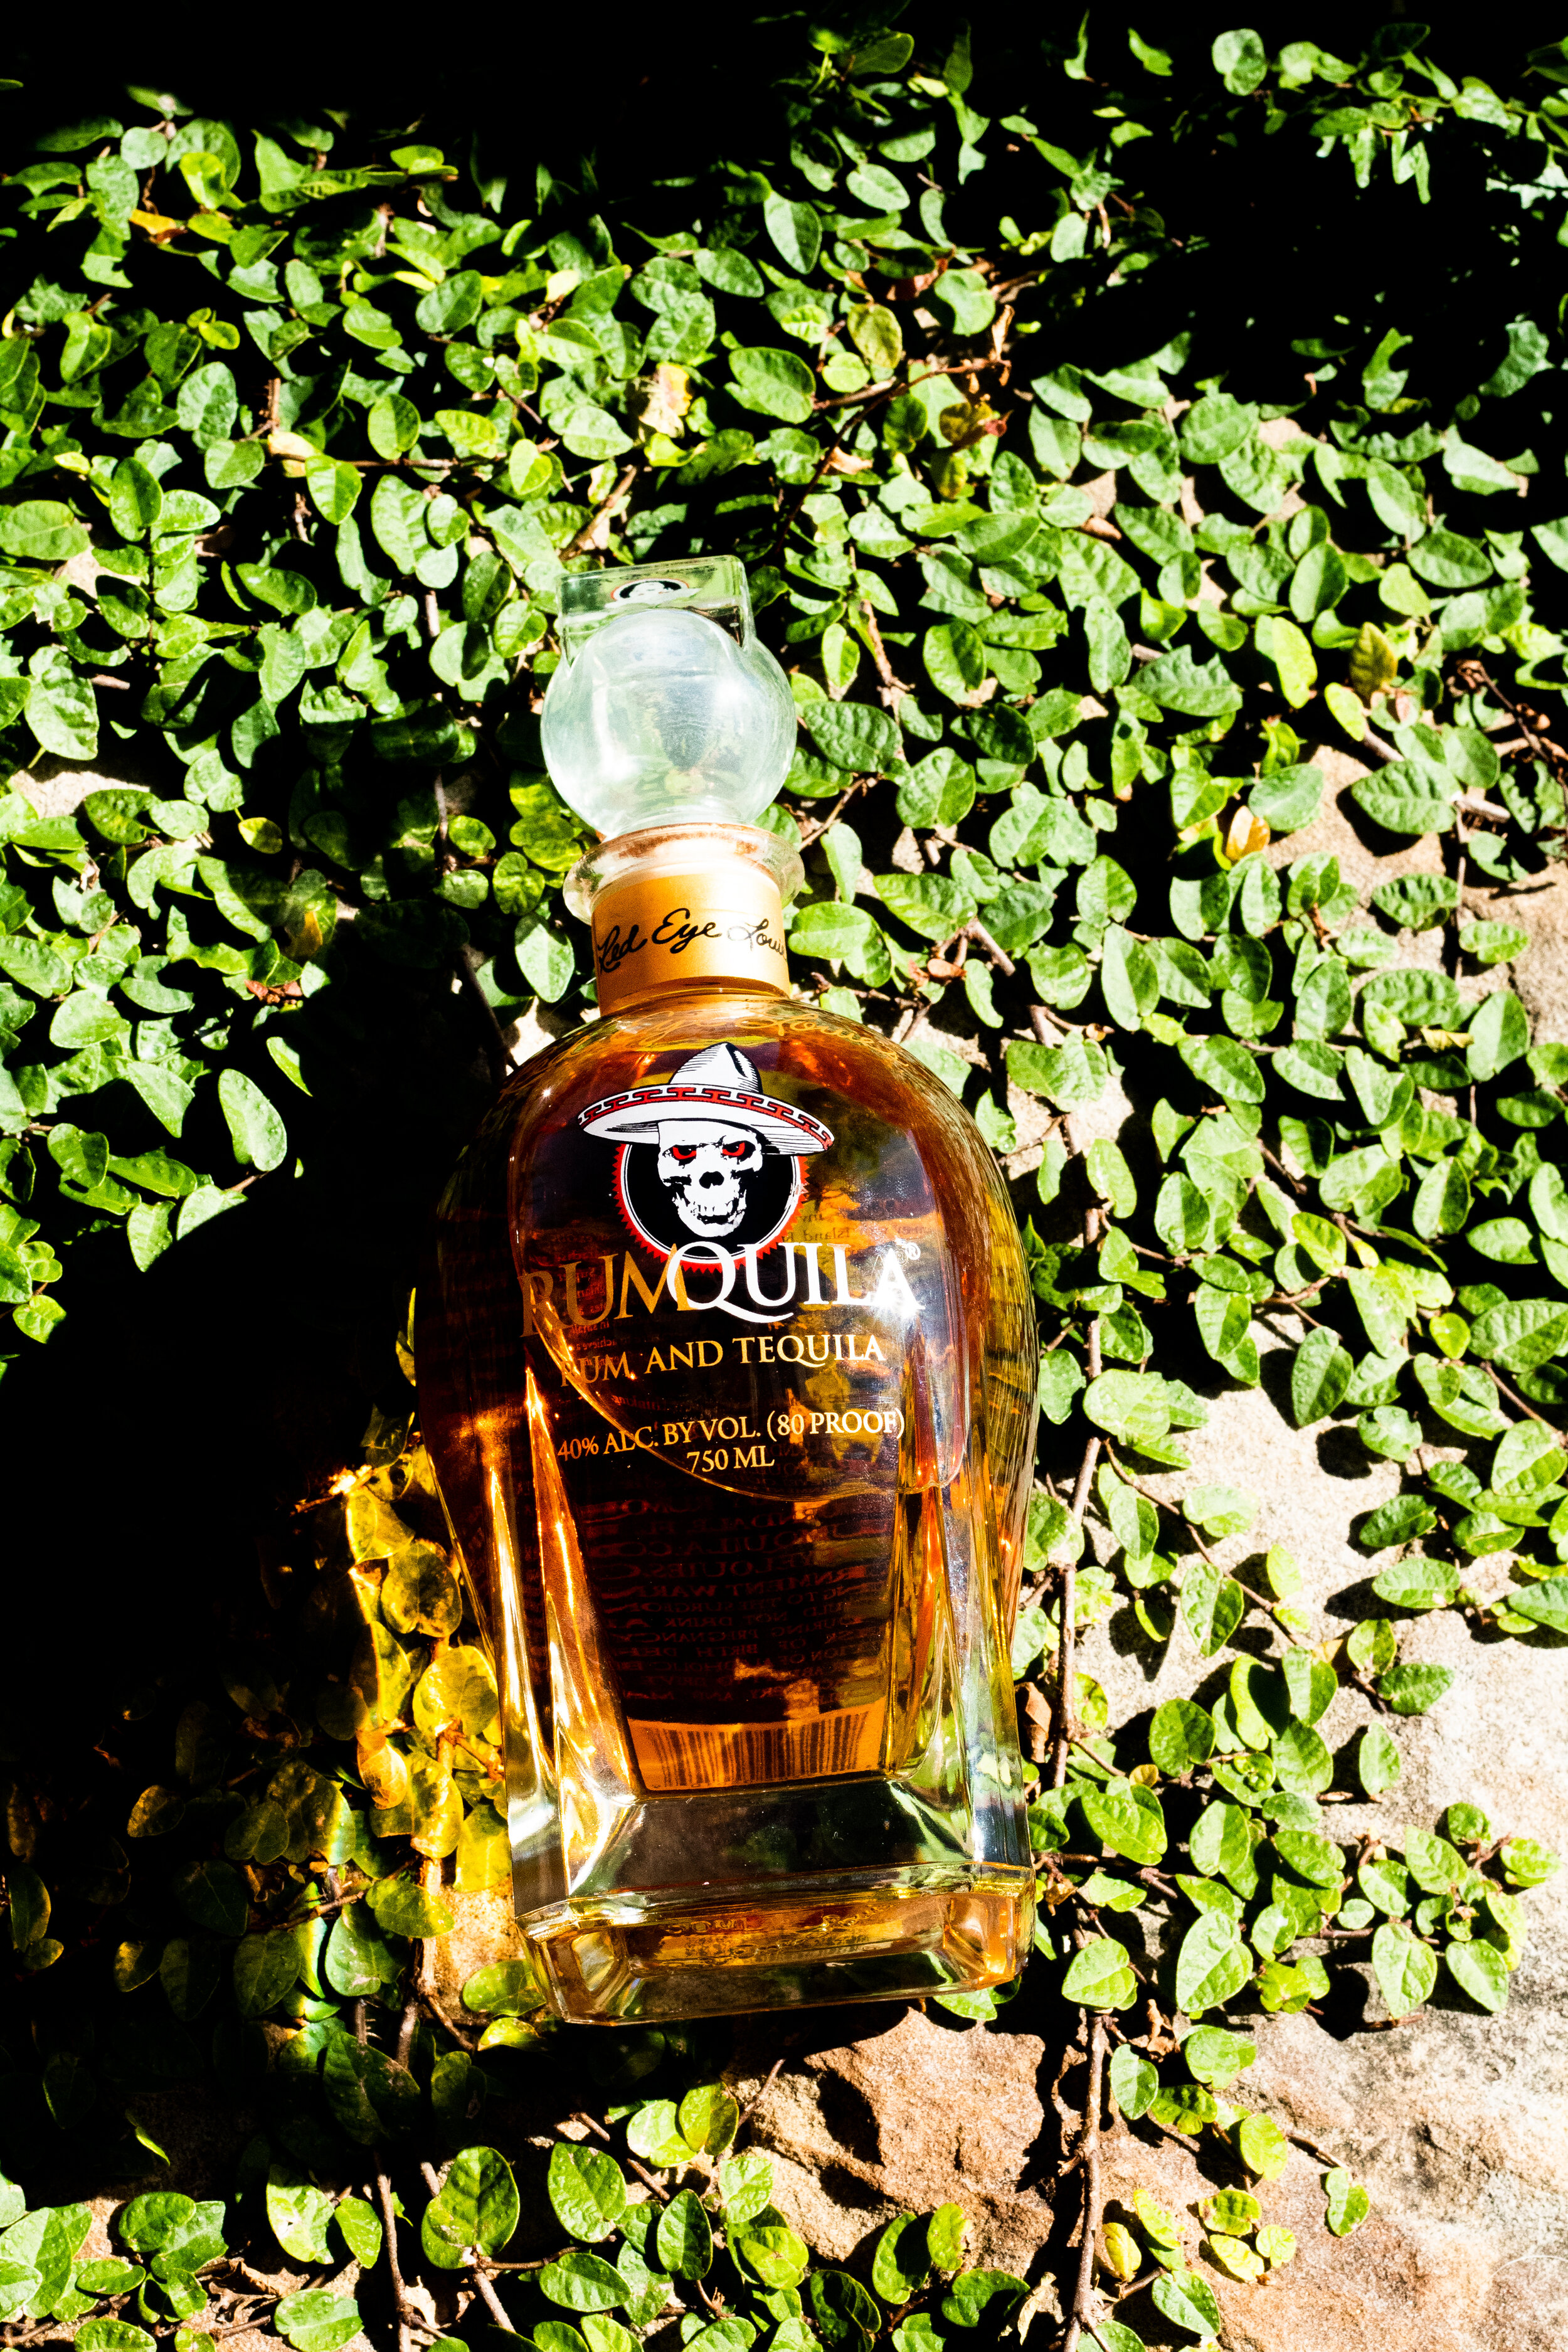 Rumquila - Red Eye Louie’s Rumquila invites you to experience an exotic journey with Island Rum from a Puerto Rican paradise and the unexpected sweet, floral pleasures of Super Premium Tequila from Mexico, distilled in the Highlands of Jalisco. Why pick one party when you can have both?